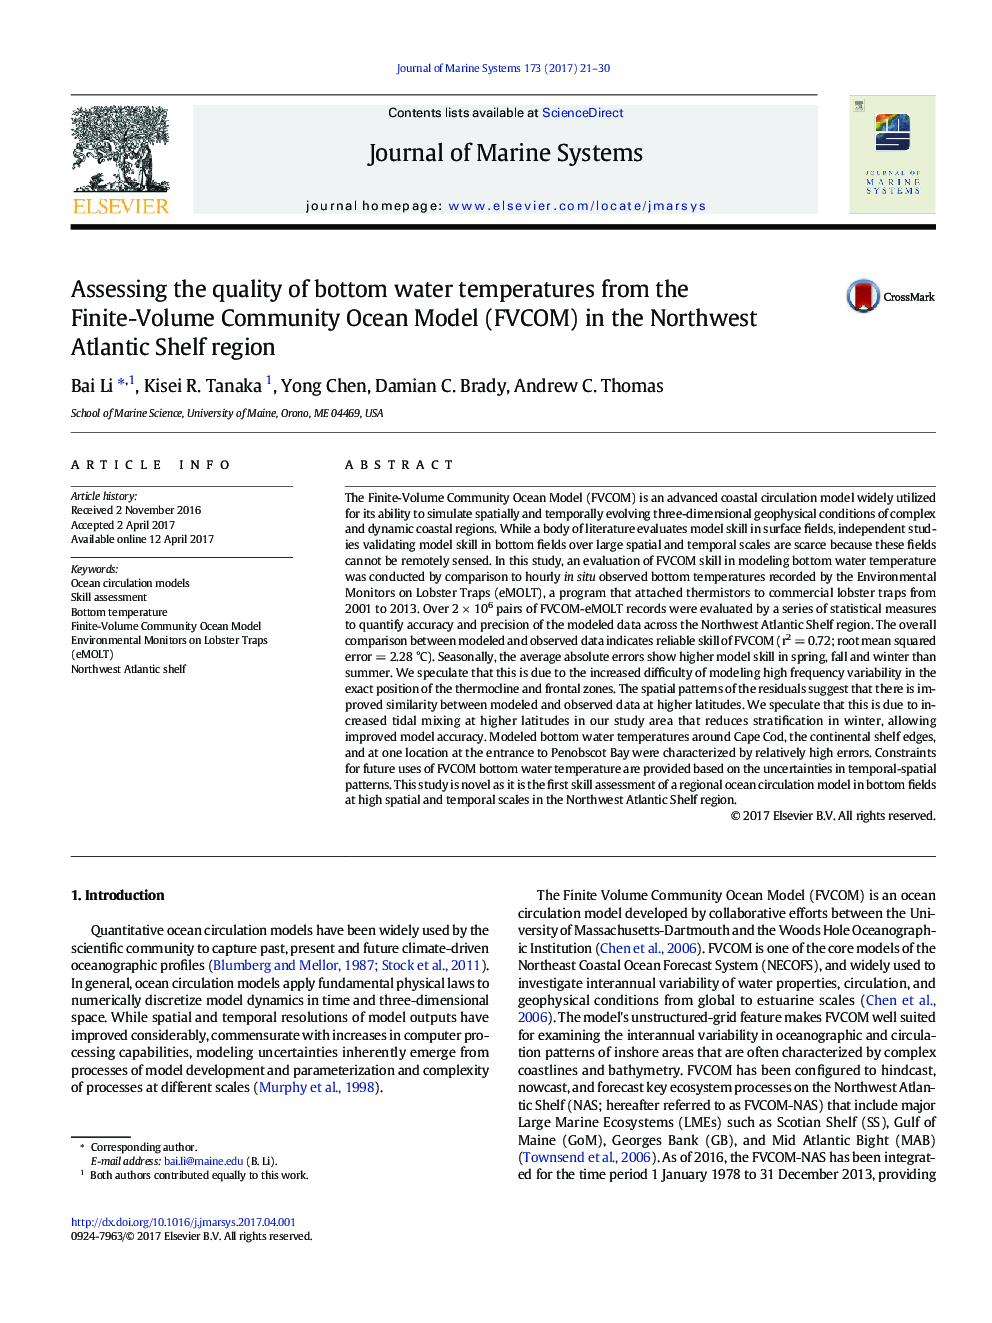 Assessing the quality of bottom water temperatures from the Finite-Volume Community Ocean Model (FVCOM) in the Northwest Atlantic Shelf region